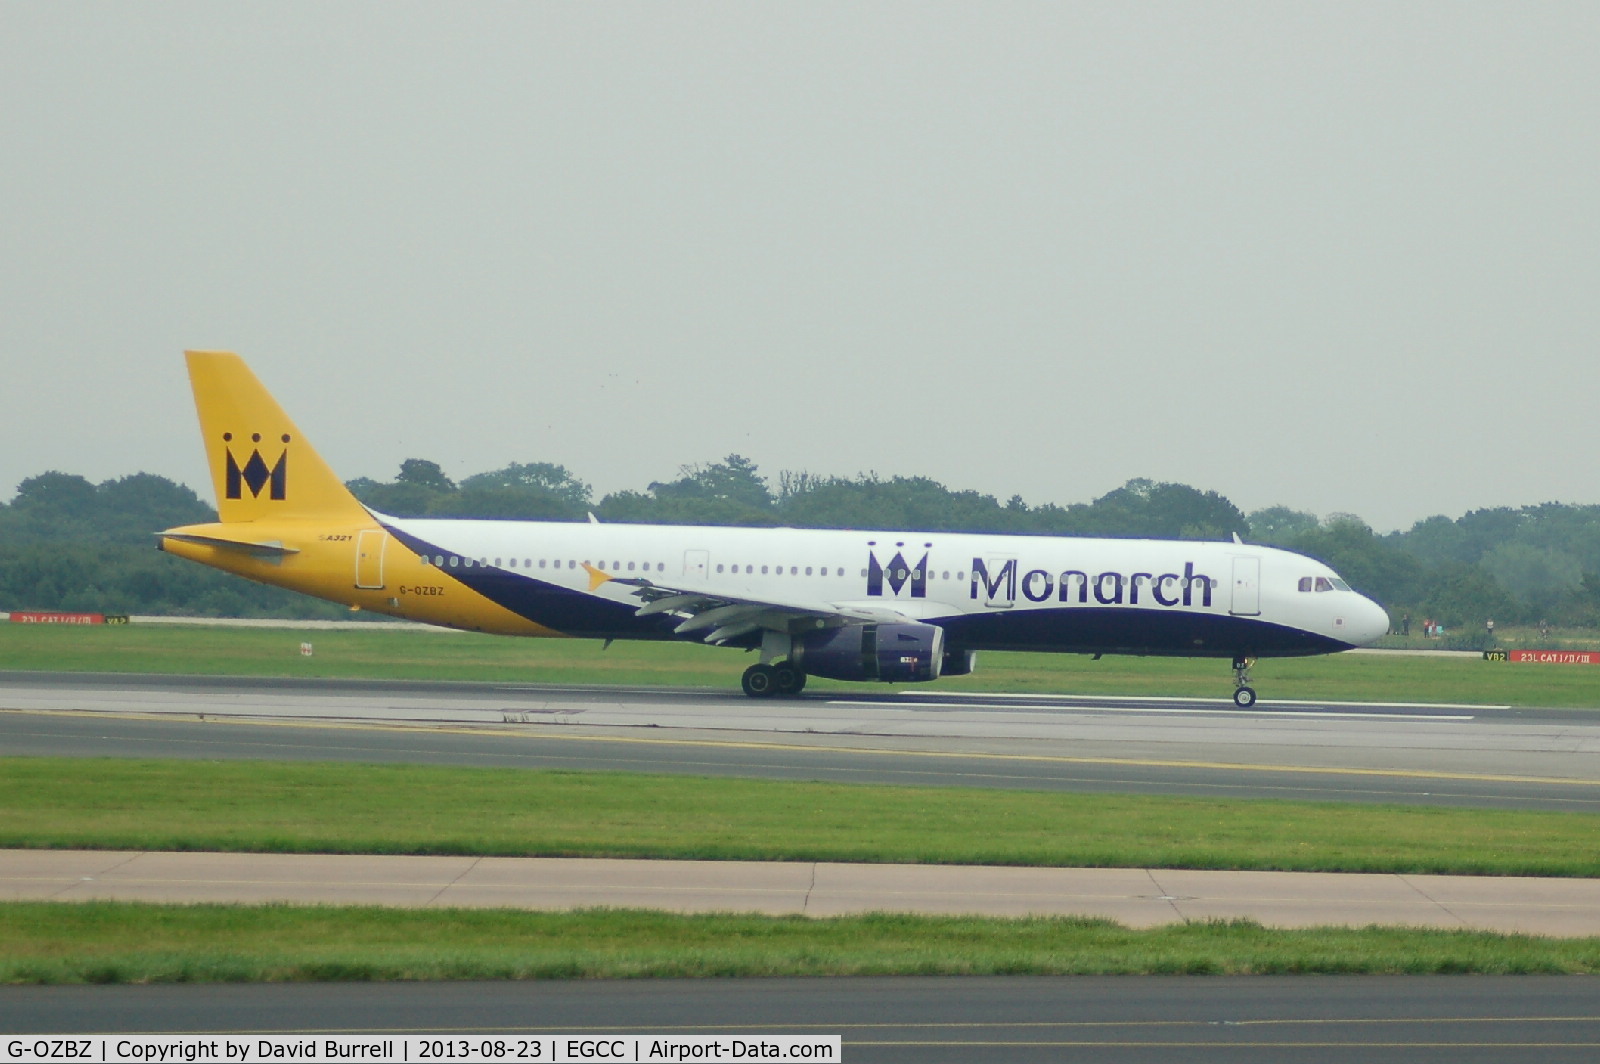 G-OZBZ, 2001 Airbus A321-231 C/N 1421, Monarch Airbus A321-231 Landed at Manchester Airport.